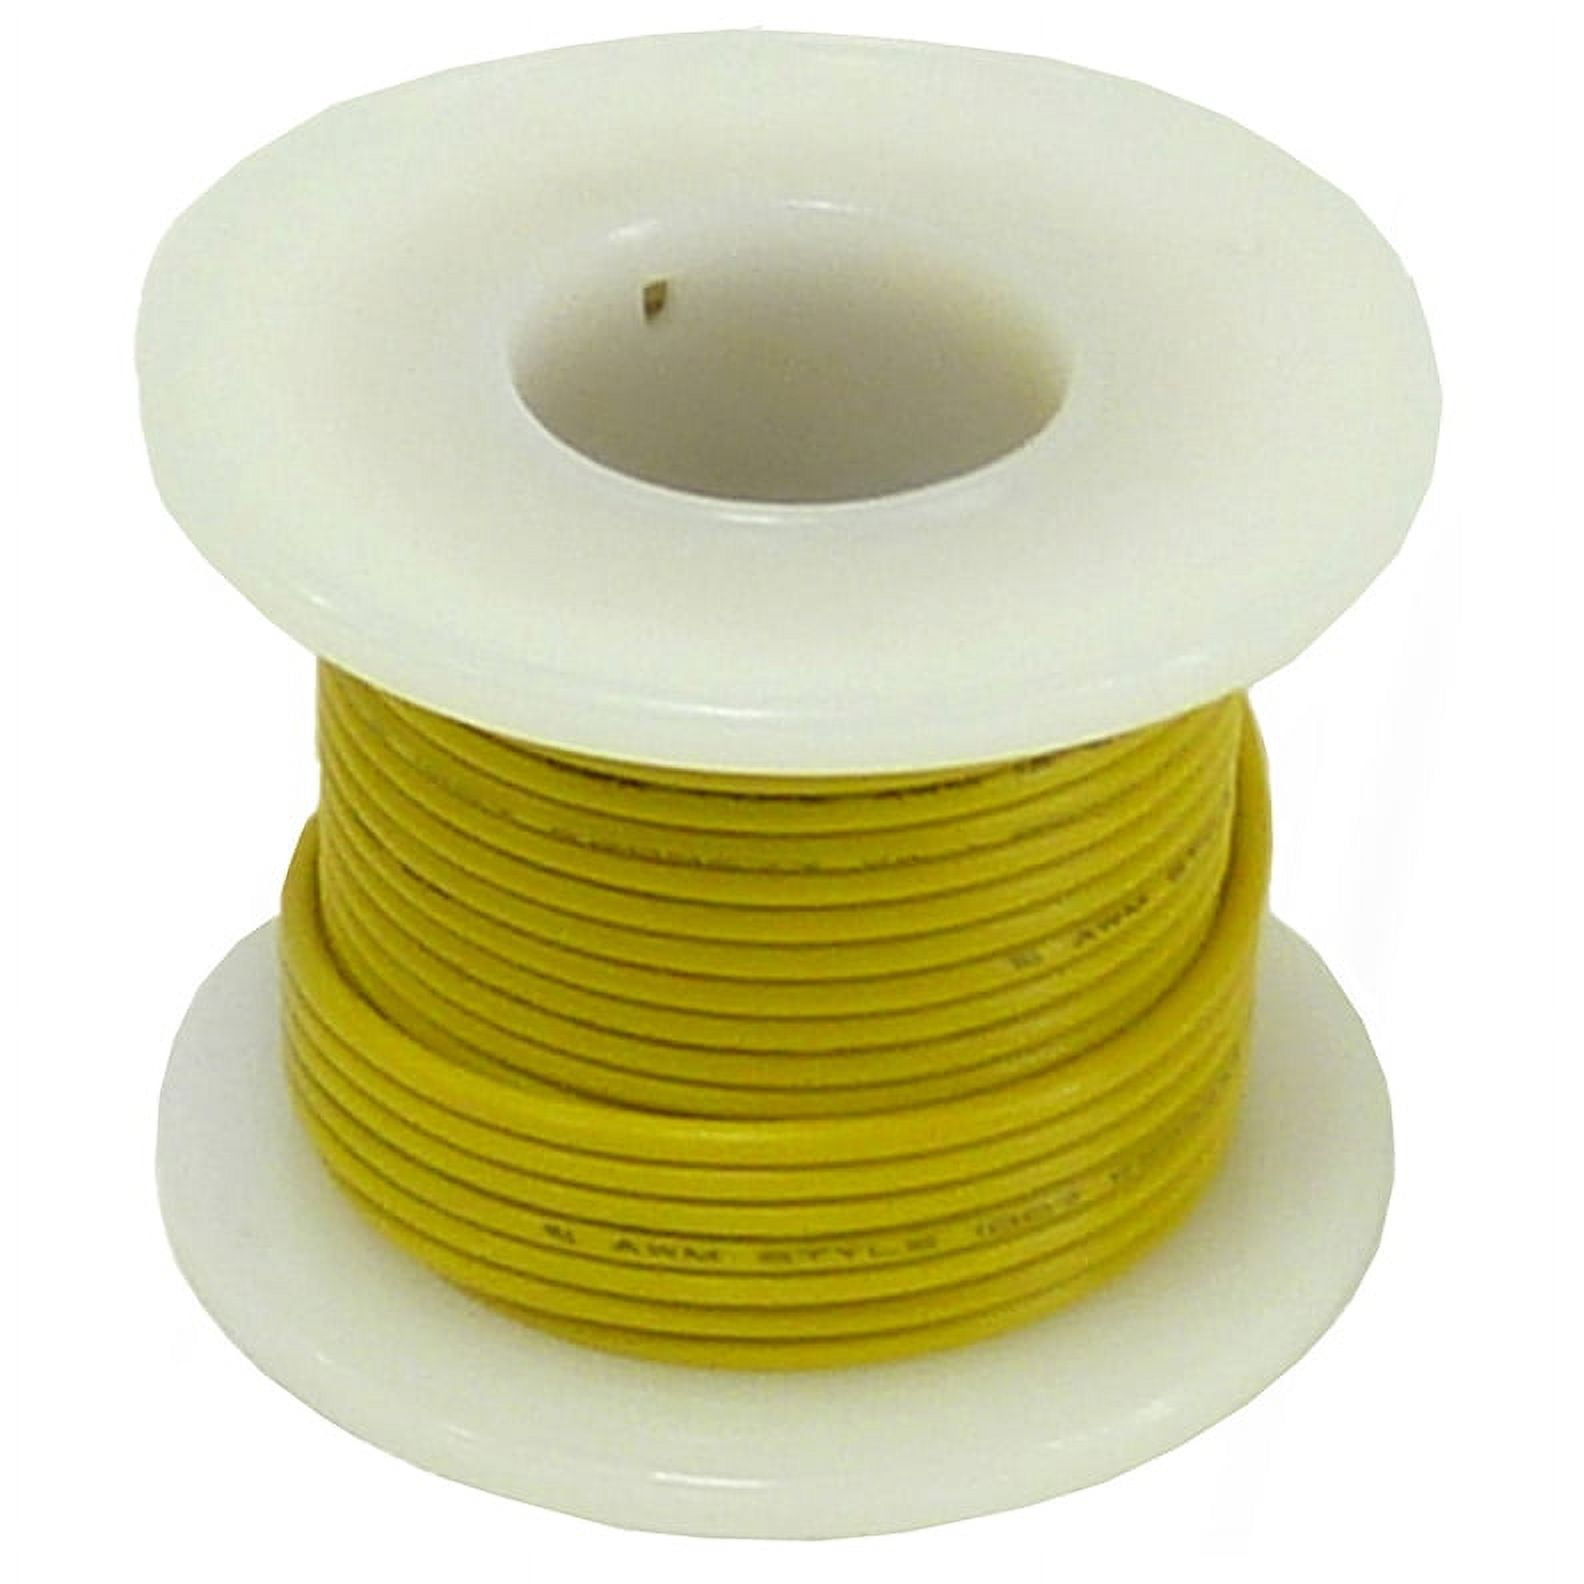 Stranded Hook Up Wire - 22 Gauge, 25 Foot Spool - Yellow (Shade May Vary) 